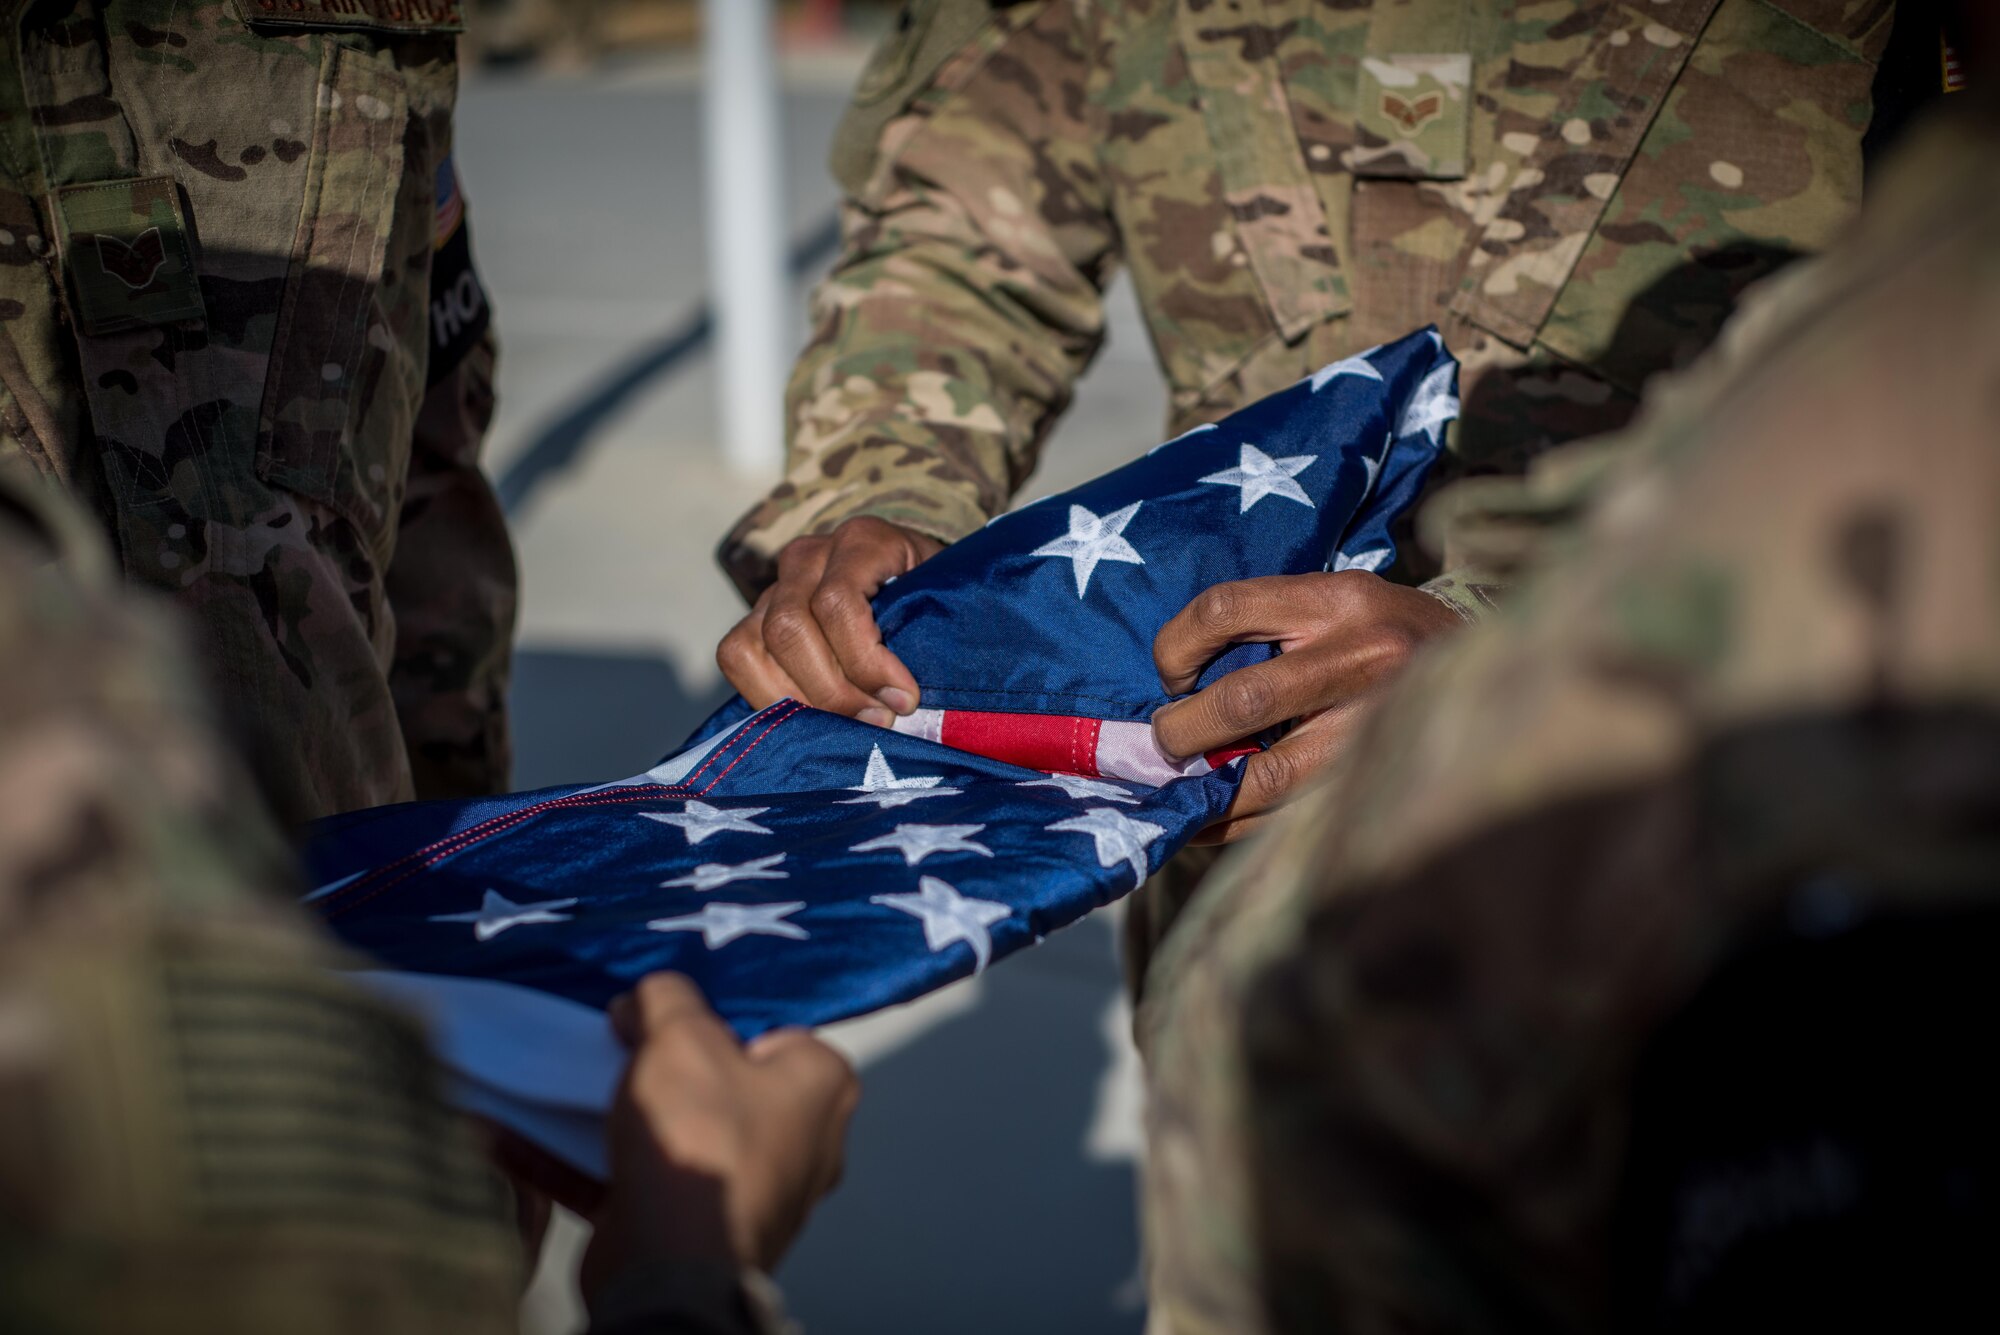 Members of the base Honor Guard team prepare to fold the flag during the Memorial Day Remembrance ceremony at Bagram Airfield, Afghanistan, May 30, 2016. Memorial Day, which was first known as Decoration Day, was created during the Civil War. It was proclaimed in 1868 by General John Logan, national commander of the Grand Army of the Republic. The day became a national holiday with the Congressional passage of the National Holiday Act in 1971. (U.S. Air Force photo by Senior Airman Robert Dantzler)